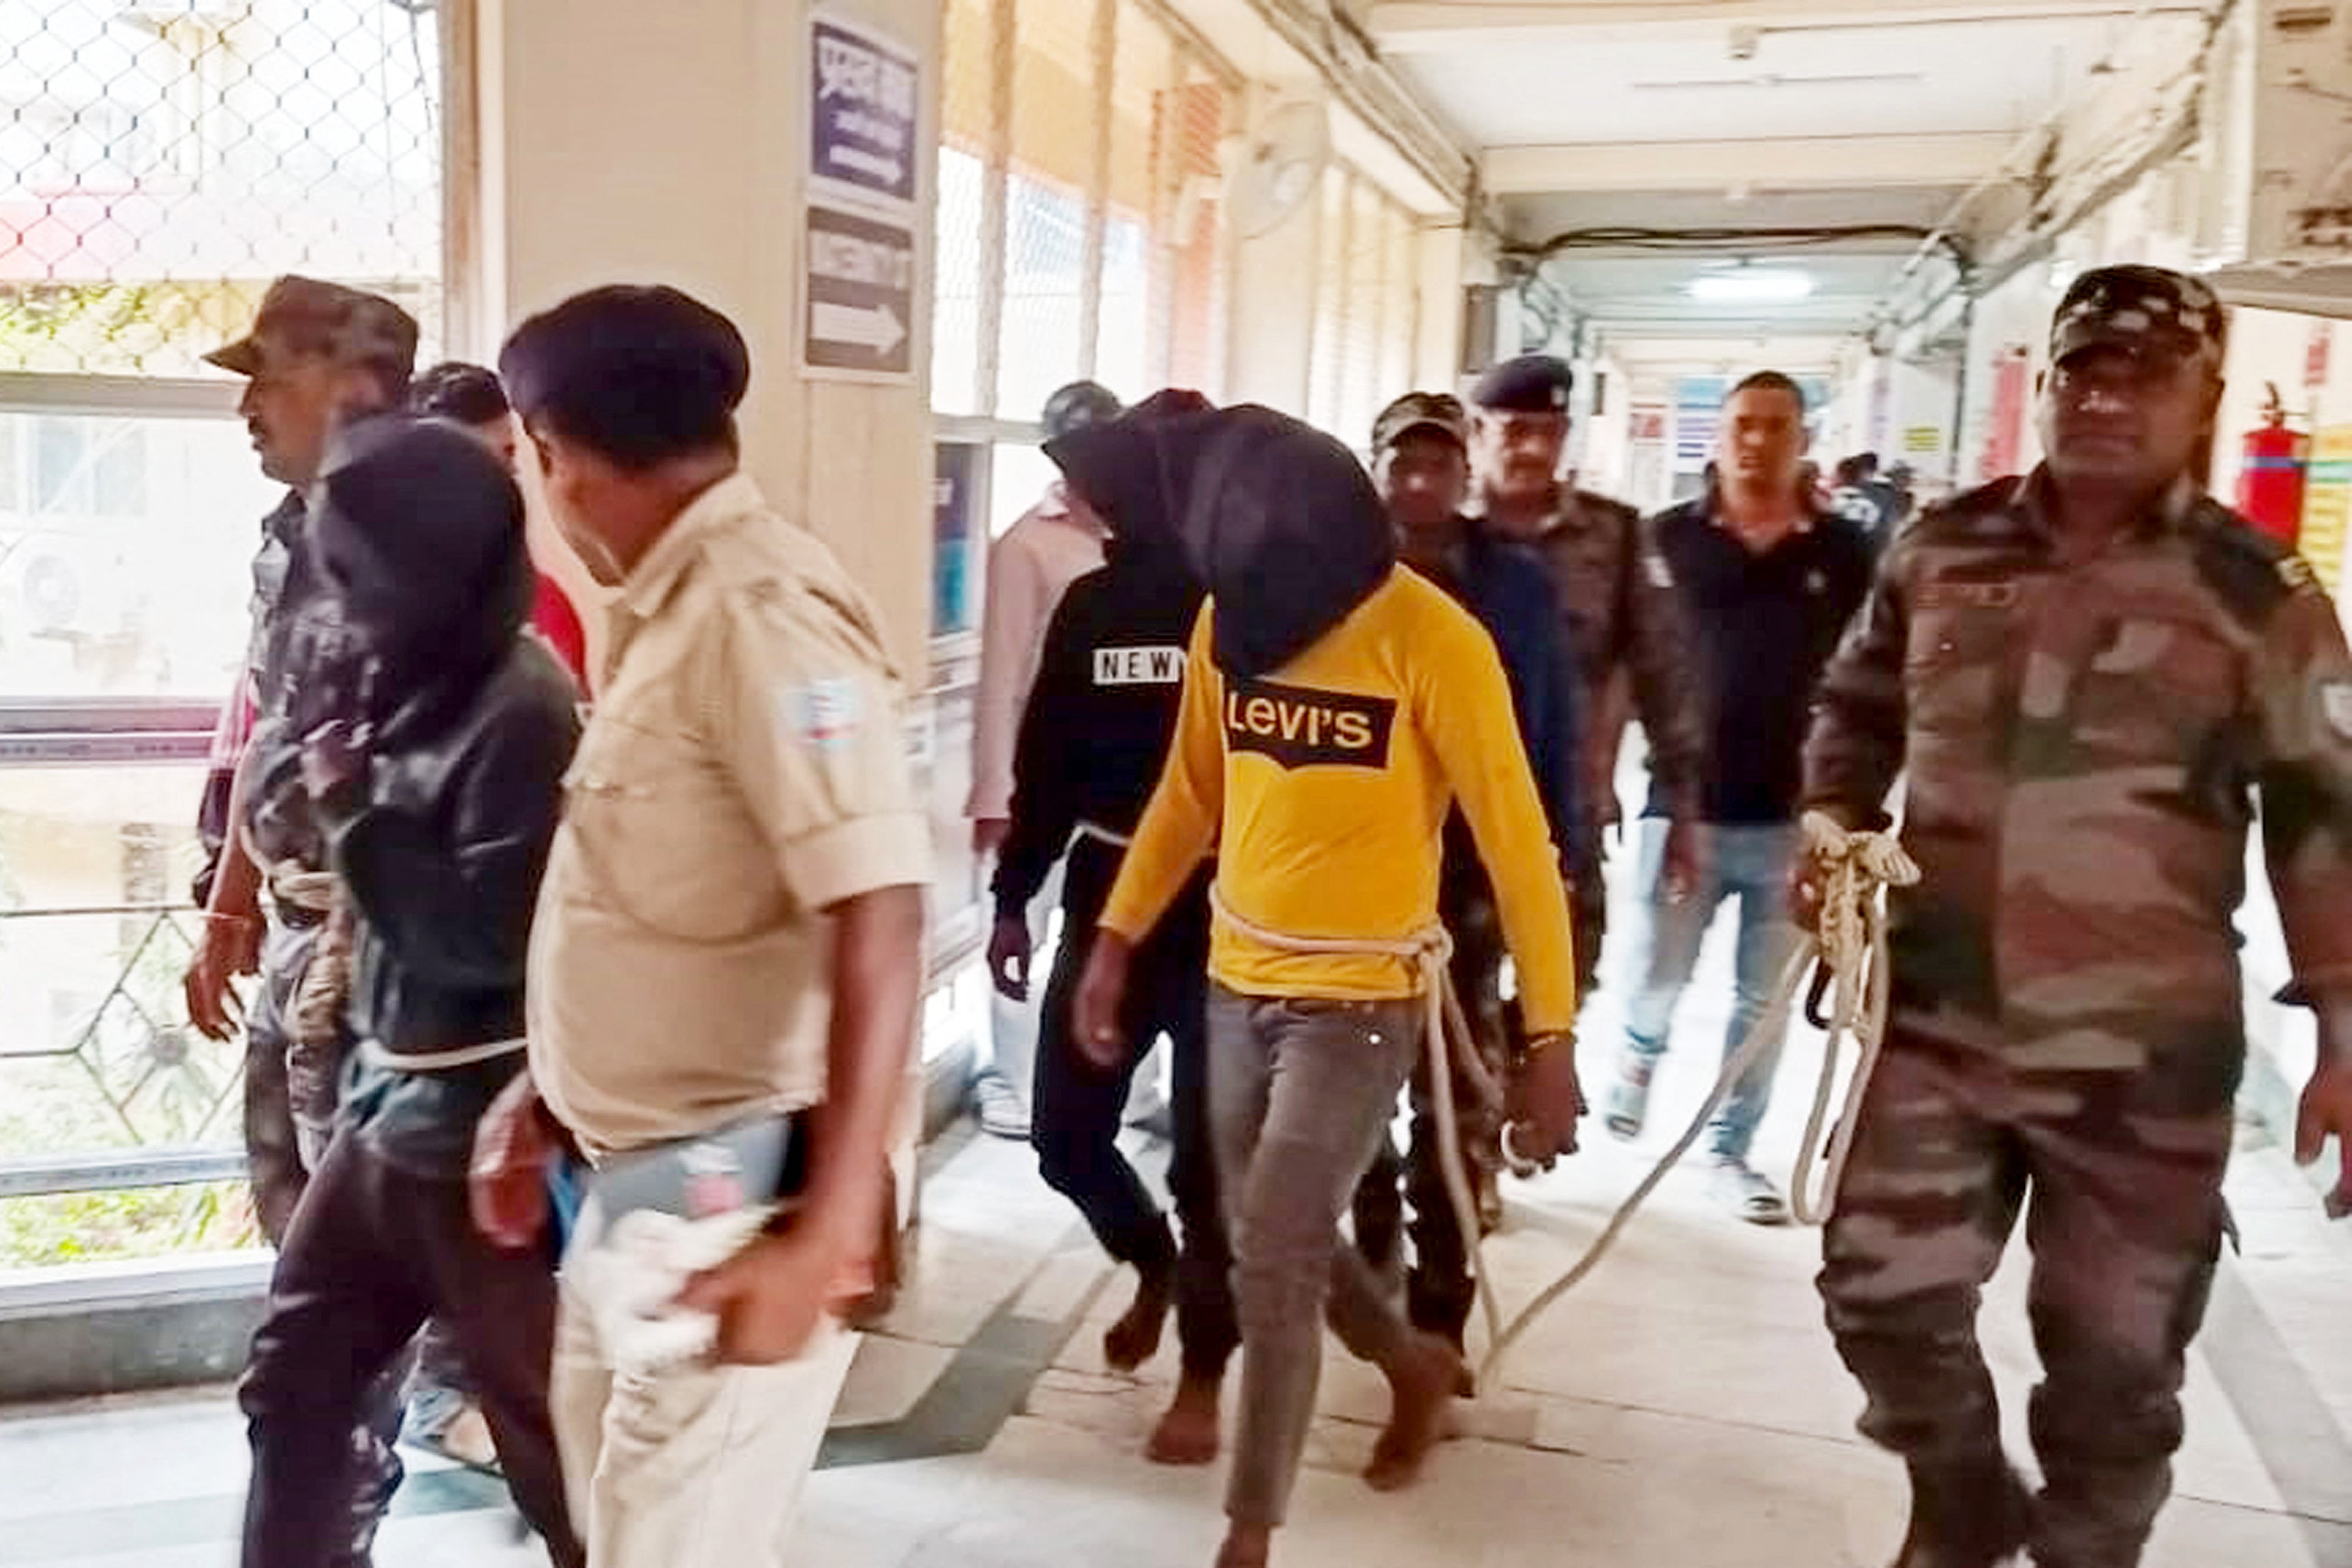 Police personnel escort men accused for allegedly carrying out a brutal assault on a Spanish woman, to a district court in Dumka, in India's Jharkhand state